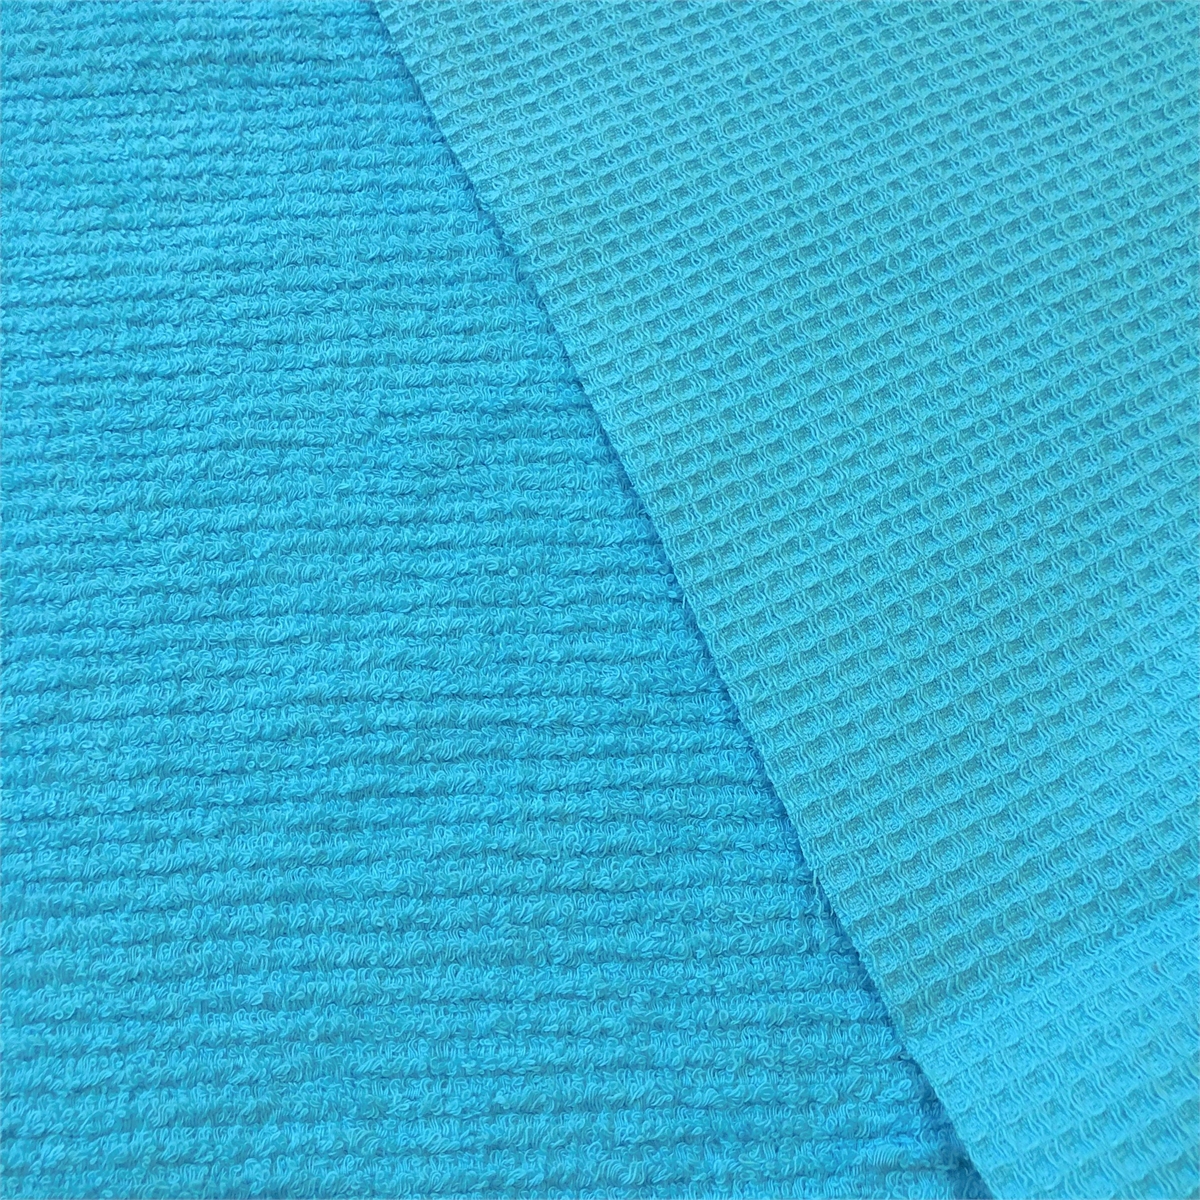 Luxury Cotton Terry Toweling Waffle Pique Fabric Material - AQUA - CRS ...